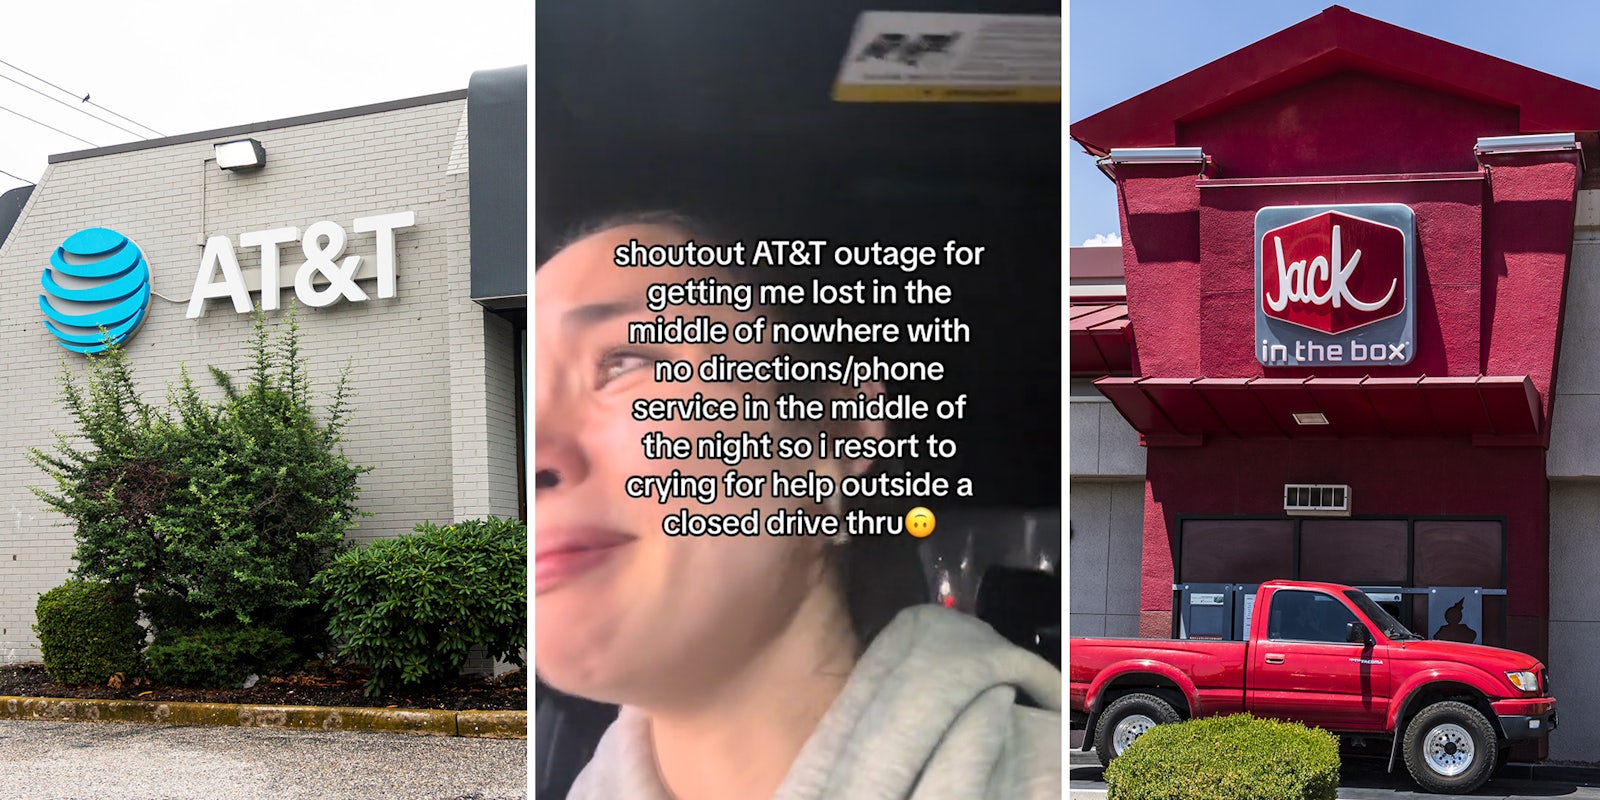 Woman cries at closed Jack in the Box drive-thru after getting lost during the AT&T outage